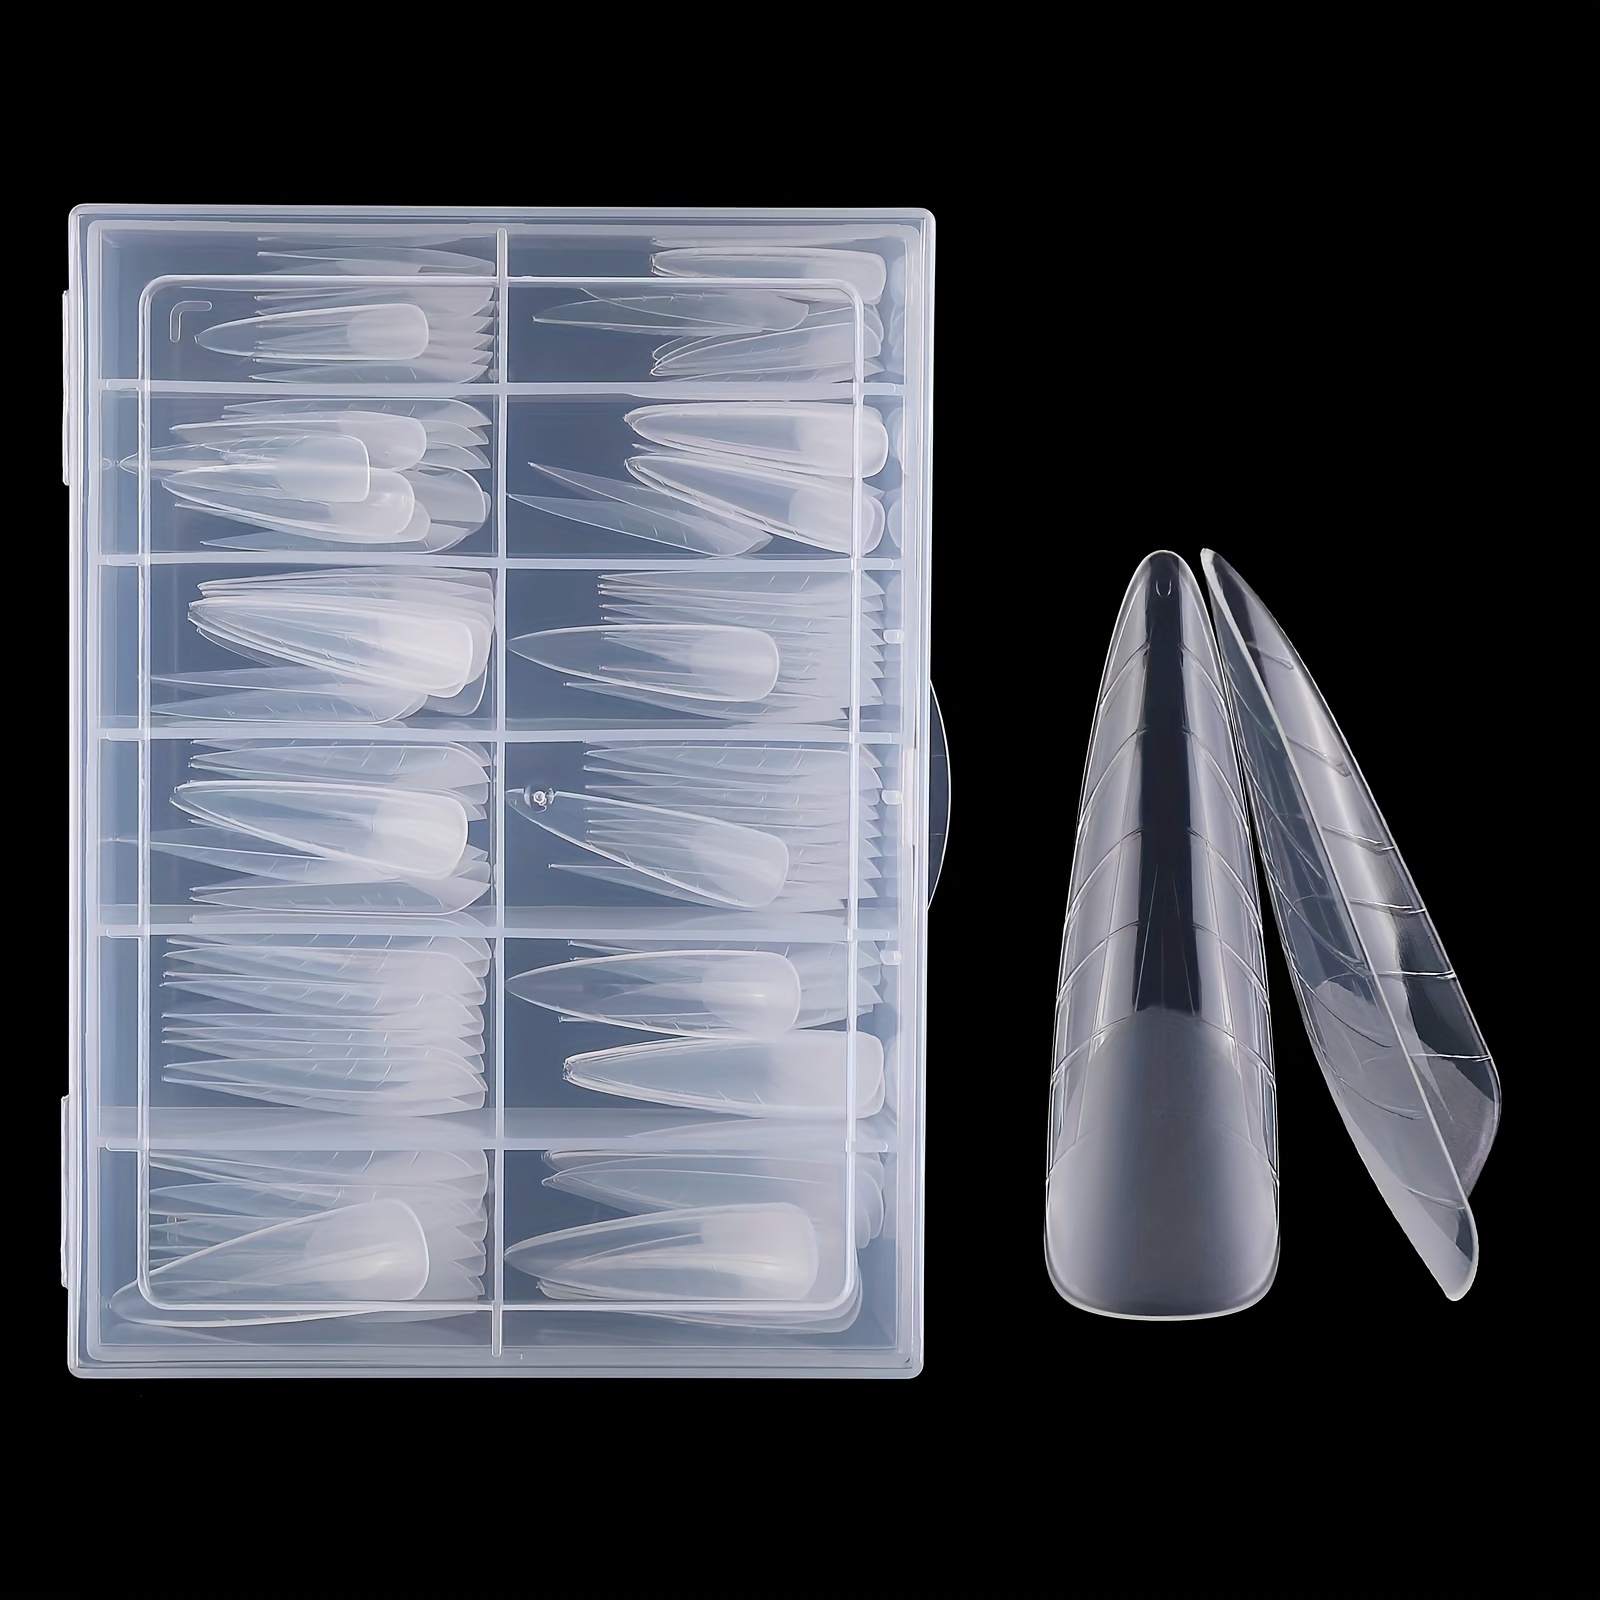 

120pcs Clear Acrylic Nail Tips Set, Full Cover Fake Nails, Reusable Quick Extension Gel Nail Forms, Paperless Mold Trays For Nail Art Salon And Home Diy